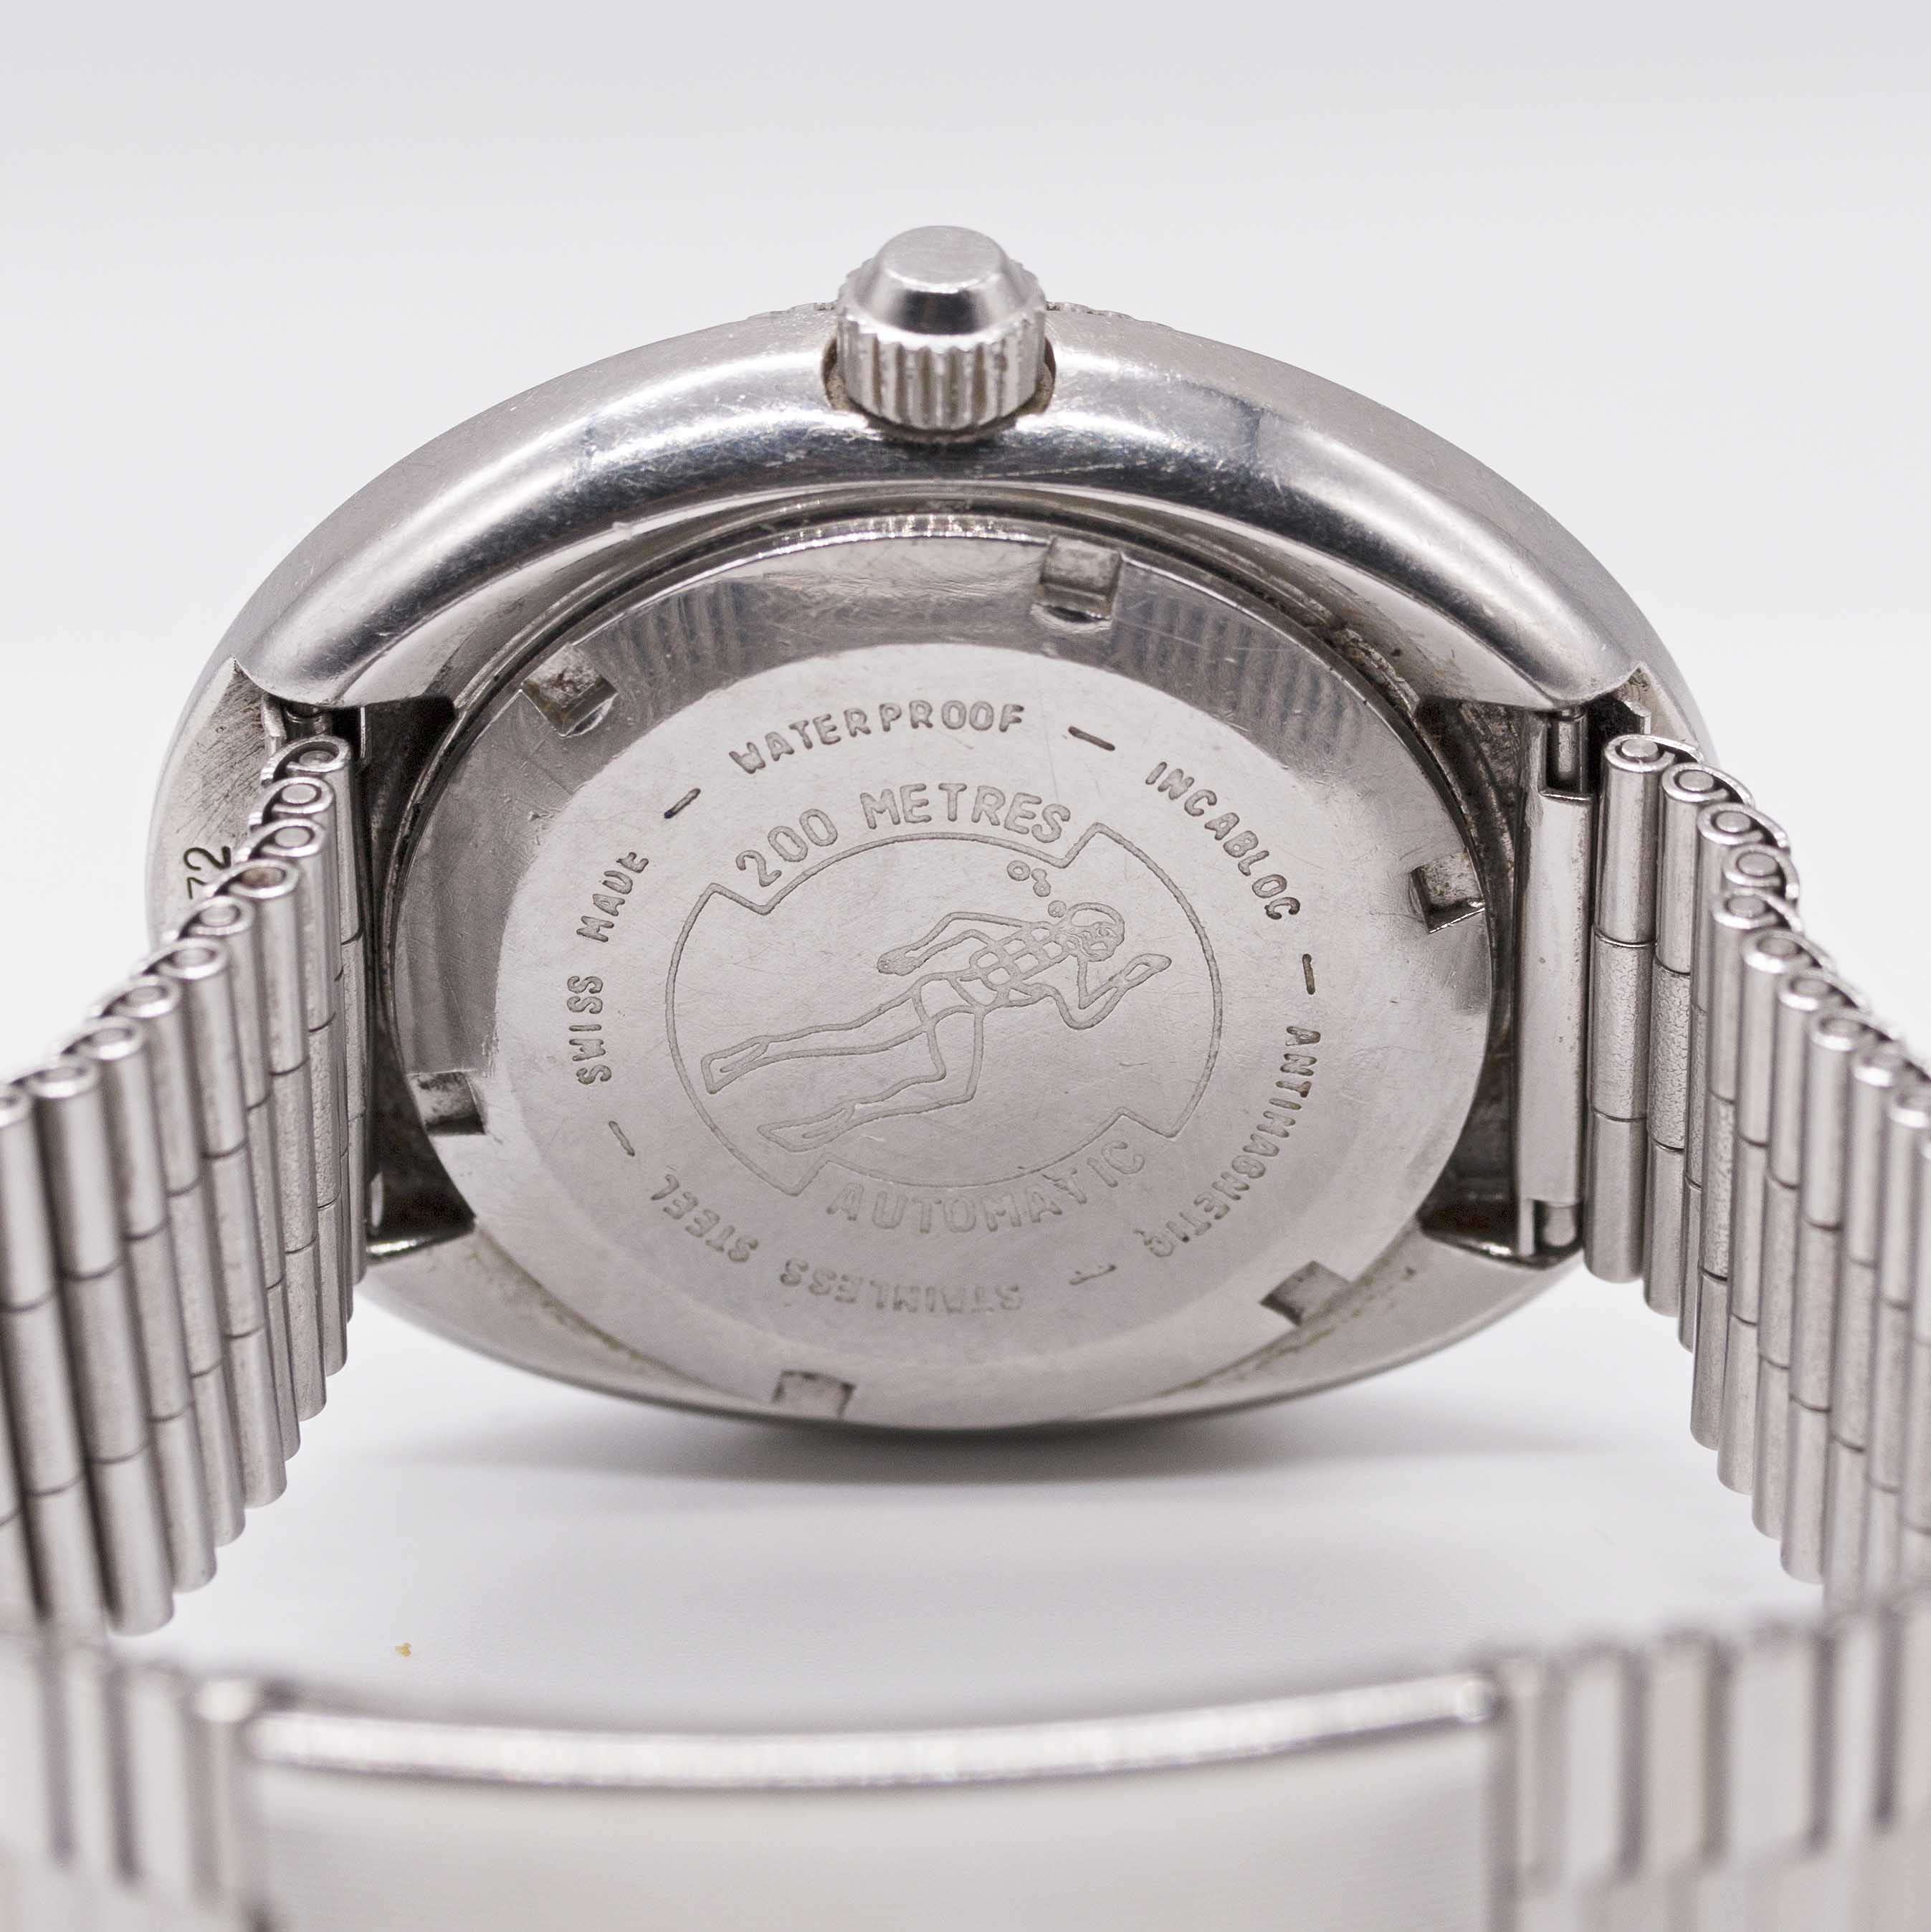 A GENTLEMAN'S STAINLESS STEEL MONDAINE AUTOMATIC DIVERS BRACELET WATCH CIRCA 1970, WITH "SERPENT" - Image 5 of 7